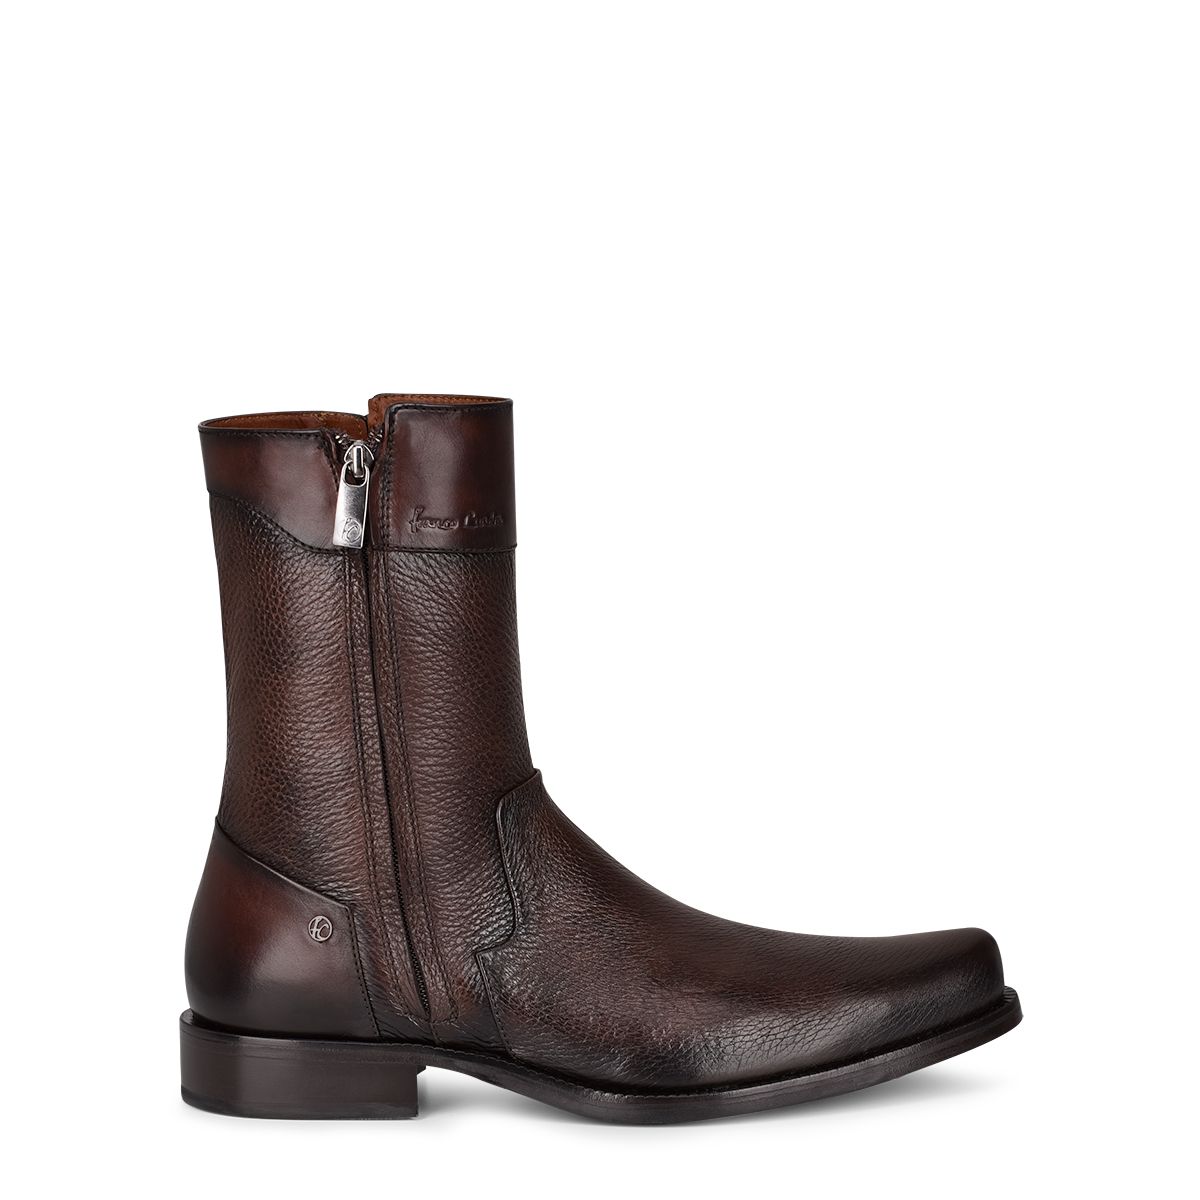 802VNBS - Cuadra brown dress casual deer leather ankle boots for men-FRANCO CUADRA-Kuet-Cuadra-Boots